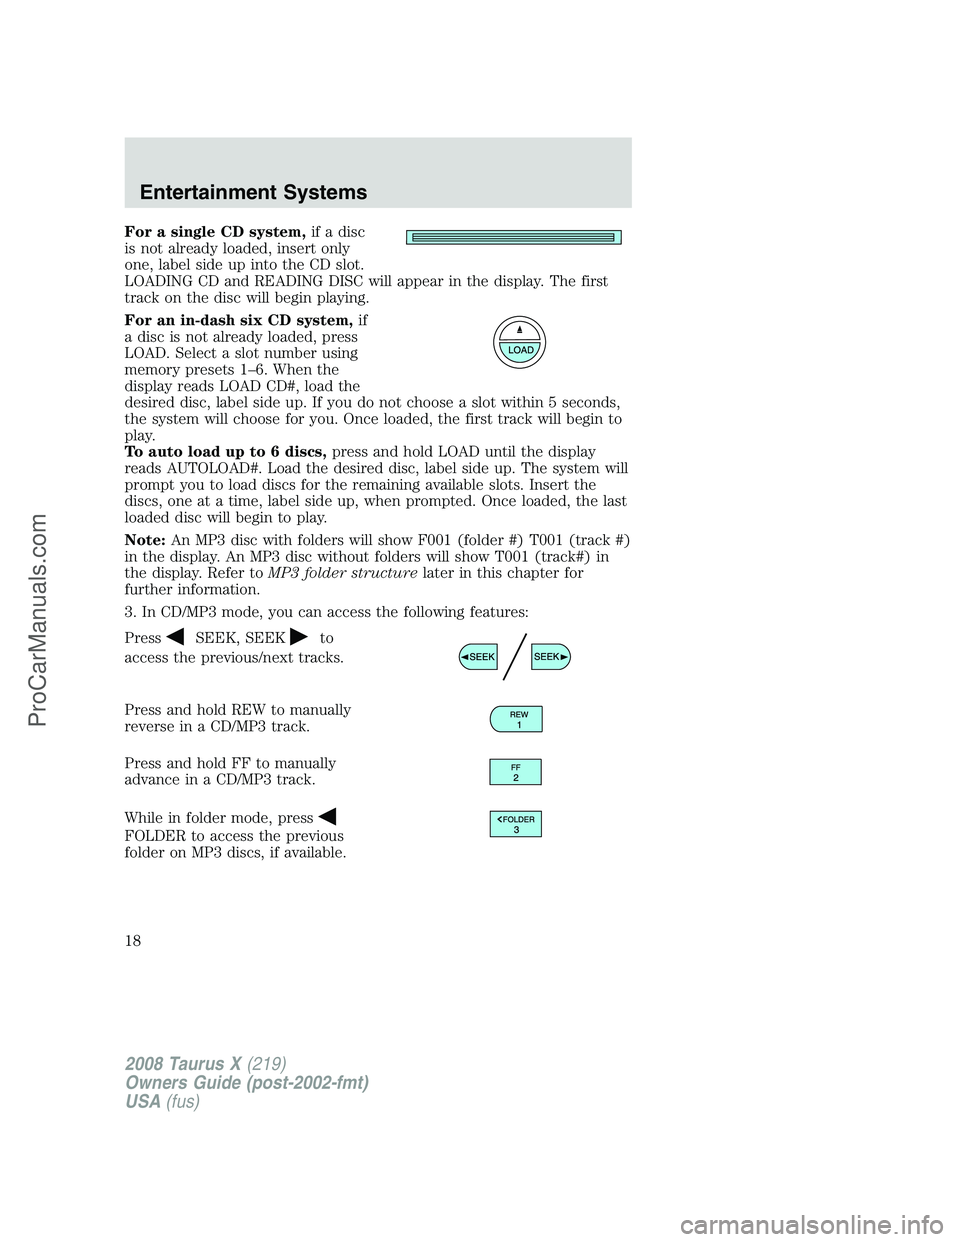 FORD FREESTYLE 2008 User Guide For a single CD system,if a disc
is not already loaded, insert only
one, label side up into the CD slot.
LOADING CD and READING DISC will appear in the display. The first
track on the disc will begin 